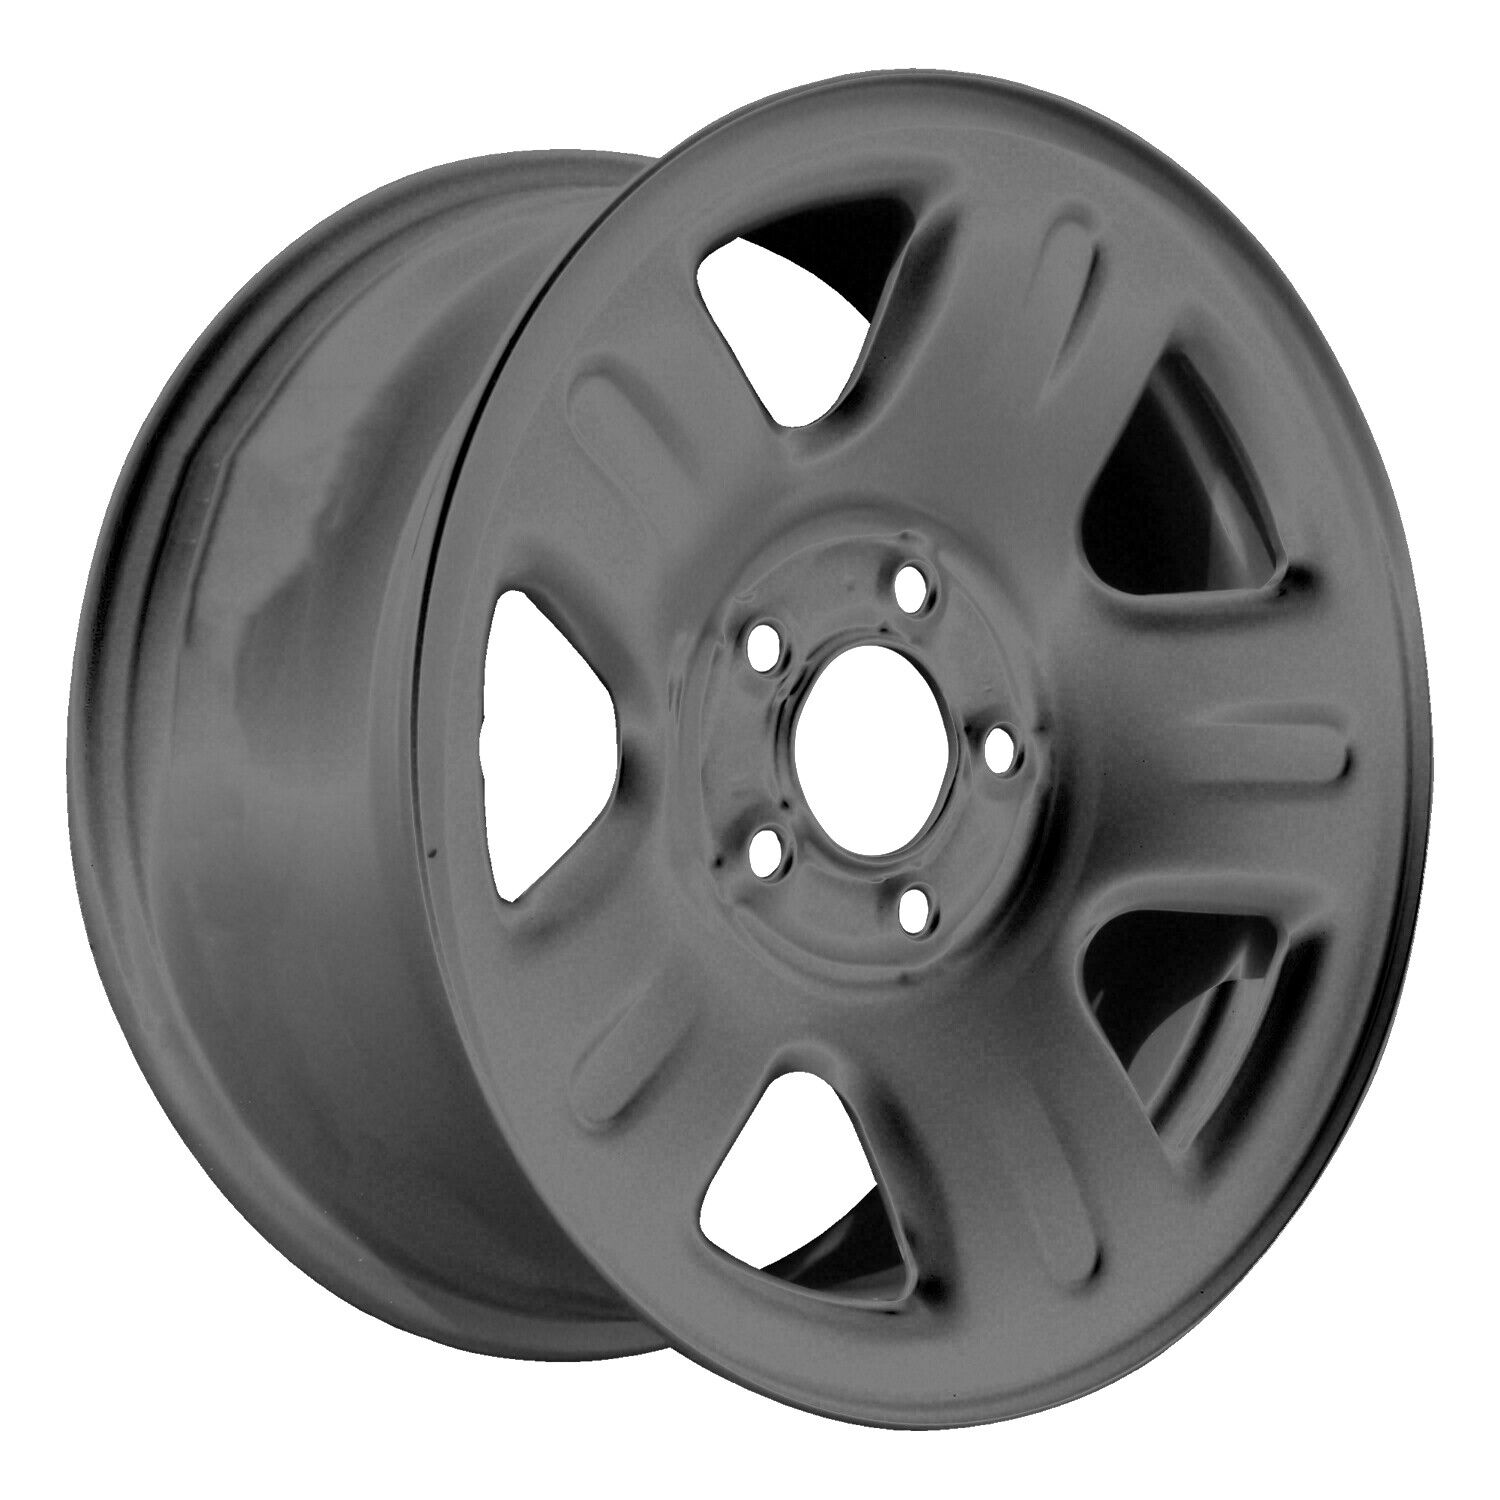 03452 Reconditioned OEM 16x7 Black Steel Wheel fits 2002-2004 Ford Explorer